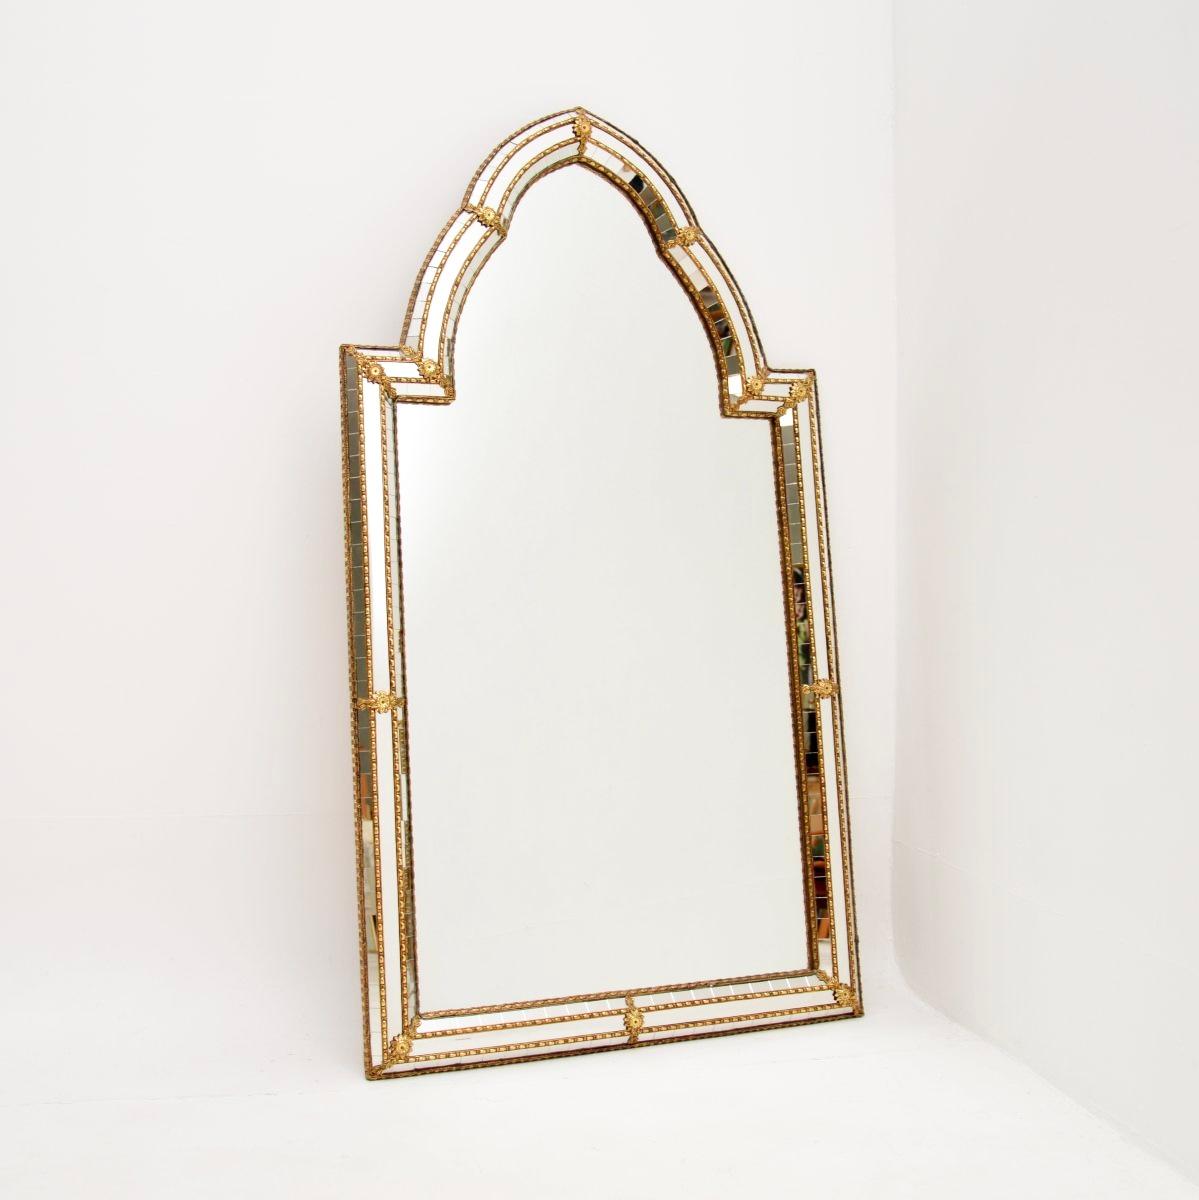 An extremely beautiful and stylish vintage Italian Hollywood Regency style mirror. This was made in Italy, it dates from around the 1970’s.

It is a large and impressive size, with a gorgeous design. This has a high arched top, intricate brass